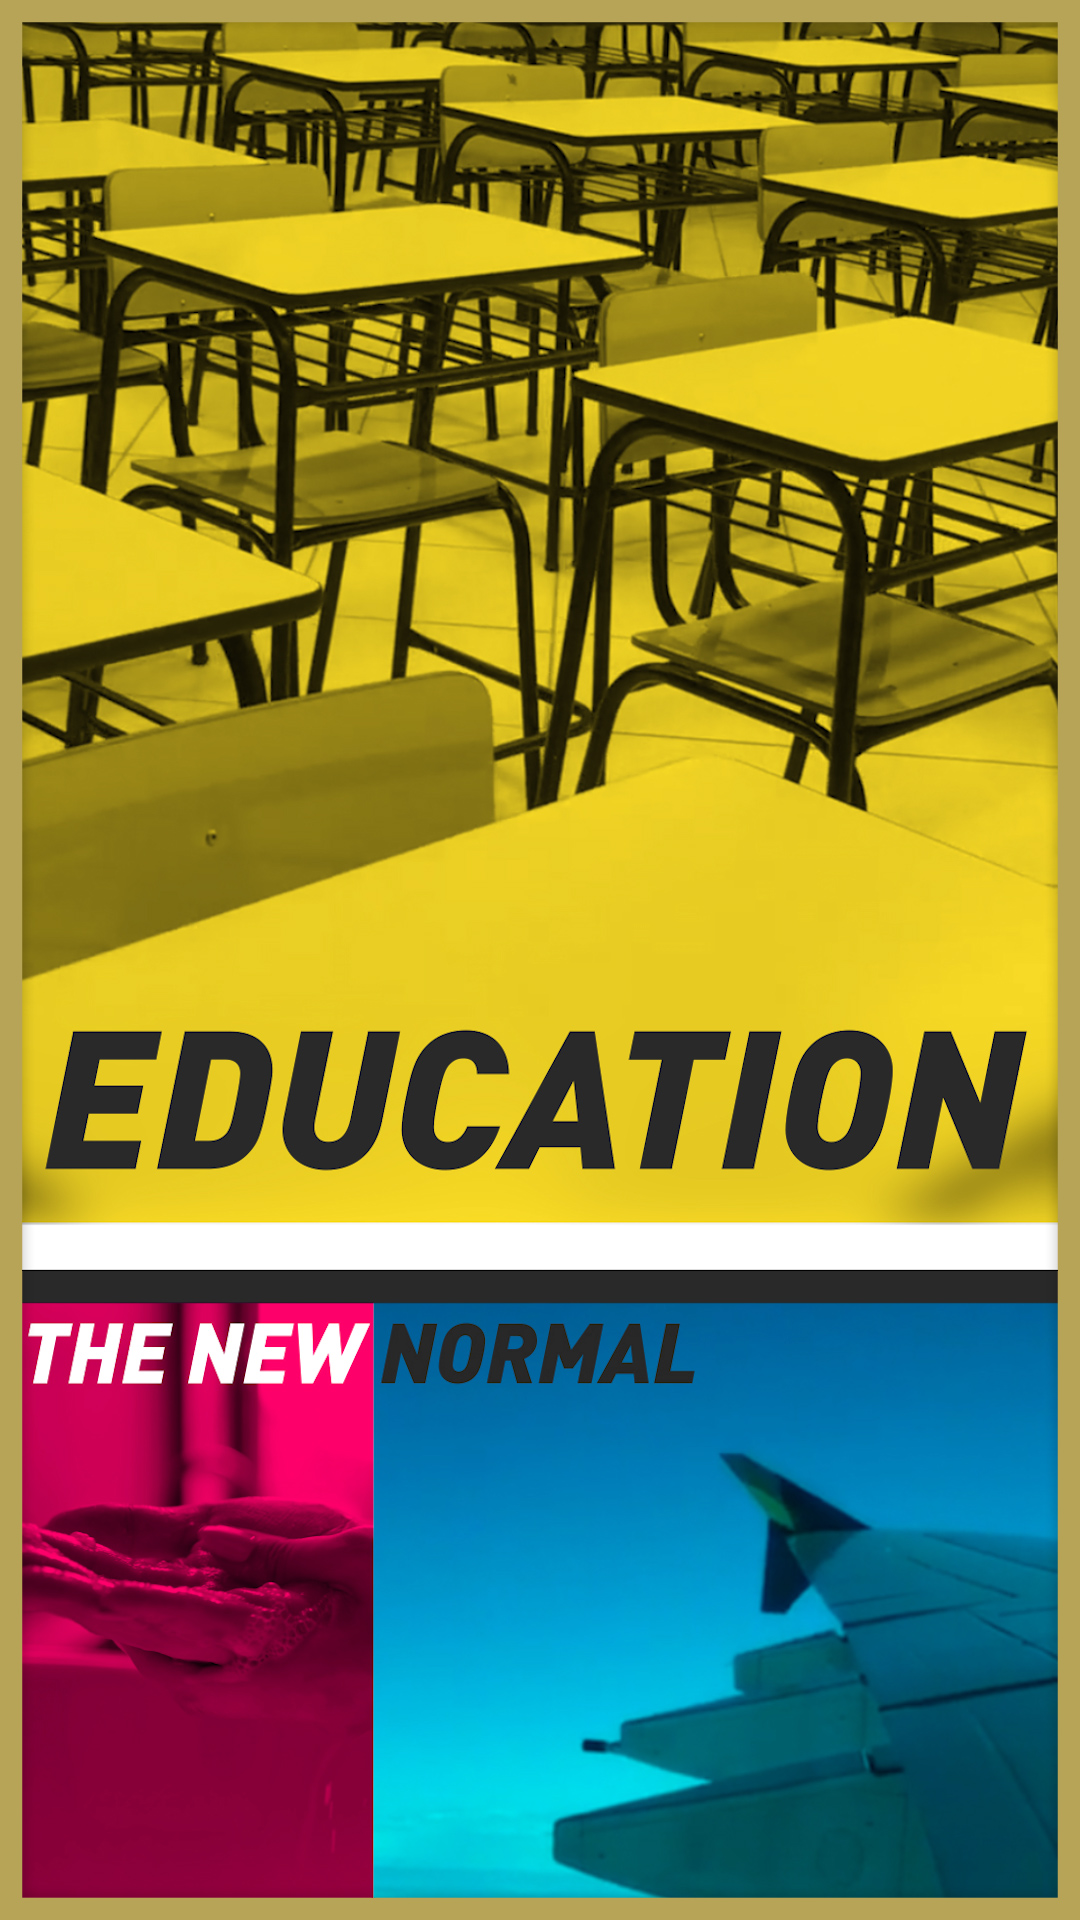 news article about new normal education using printed media